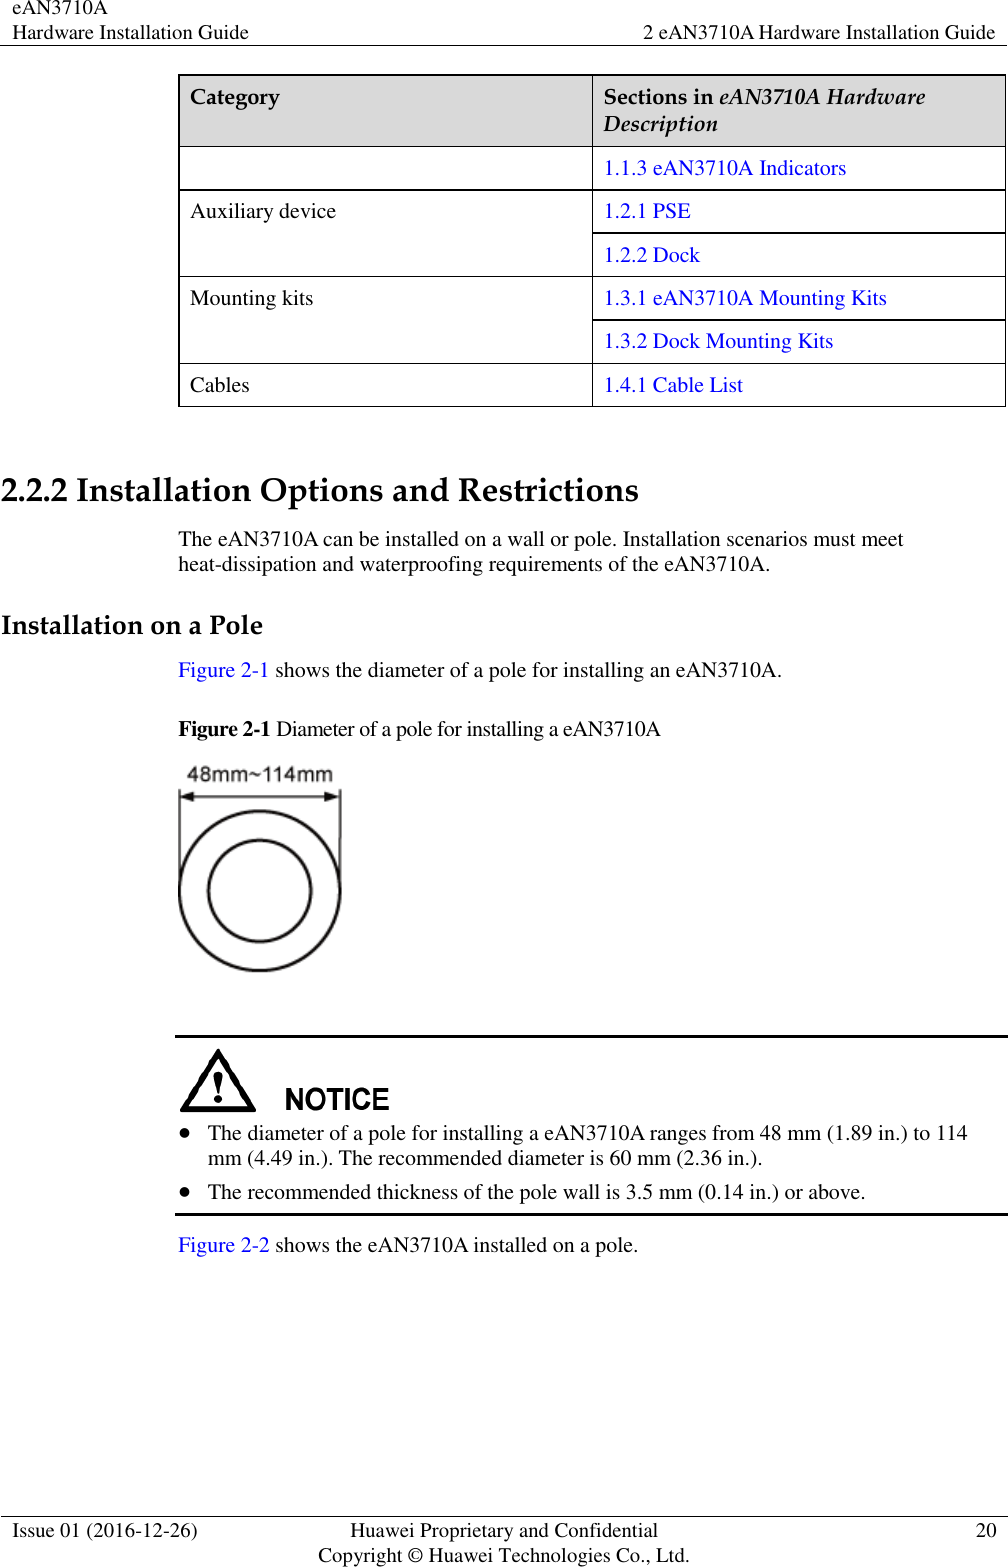 eAN3710A Hardware Installation Guide 2 eAN3710A Hardware Installation Guide  Issue 01 (2016-12-26) Huawei Proprietary and Confidential                                     Copyright © Huawei Technologies Co., Ltd. 20  Category Sections in eAN3710A Hardware Description 1.1.3 eAN3710A Indicators Auxiliary device 1.2.1 PSE 1.2.2 Dock Mounting kits 1.3.1 eAN3710A Mounting Kits 1.3.2 Dock Mounting Kits Cables 1.4.1 Cable List  2.2.2 Installation Options and Restrictions The eAN3710A can be installed on a wall or pole. Installation scenarios must meet heat-dissipation and waterproofing requirements of the eAN3710A. Installation on a Pole Figure 2-1 shows the diameter of a pole for installing an eAN3710A.   Figure 2-1 Diameter of a pole for installing a eAN3710A     The diameter of a pole for installing a eAN3710A ranges from 48 mm (1.89 in.) to 114 mm (4.49 in.). The recommended diameter is 60 mm (2.36 in.).  The recommended thickness of the pole wall is 3.5 mm (0.14 in.) or above.   Figure 2-2 shows the eAN3710A installed on a pole. 